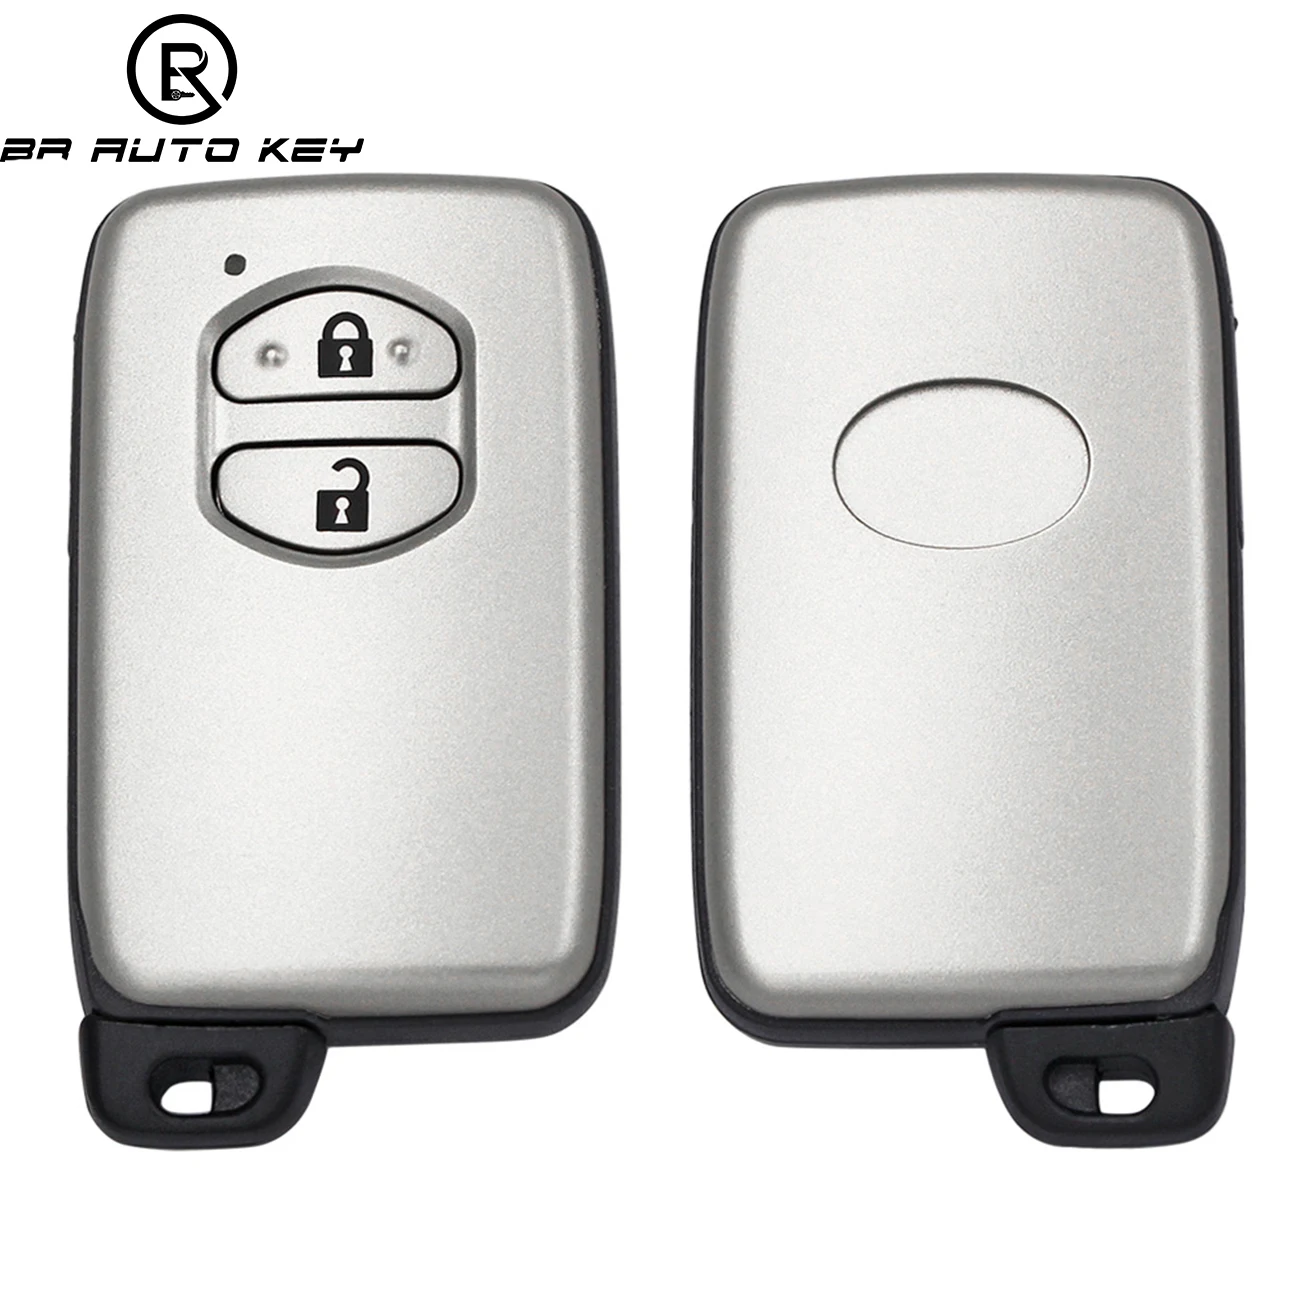 2 Buttons Smart Remote Key Case For Toyota Prius Land Cruiser Avalon Prado Prius Key shell With Uncut Blade Toy40 Toy48 Blade